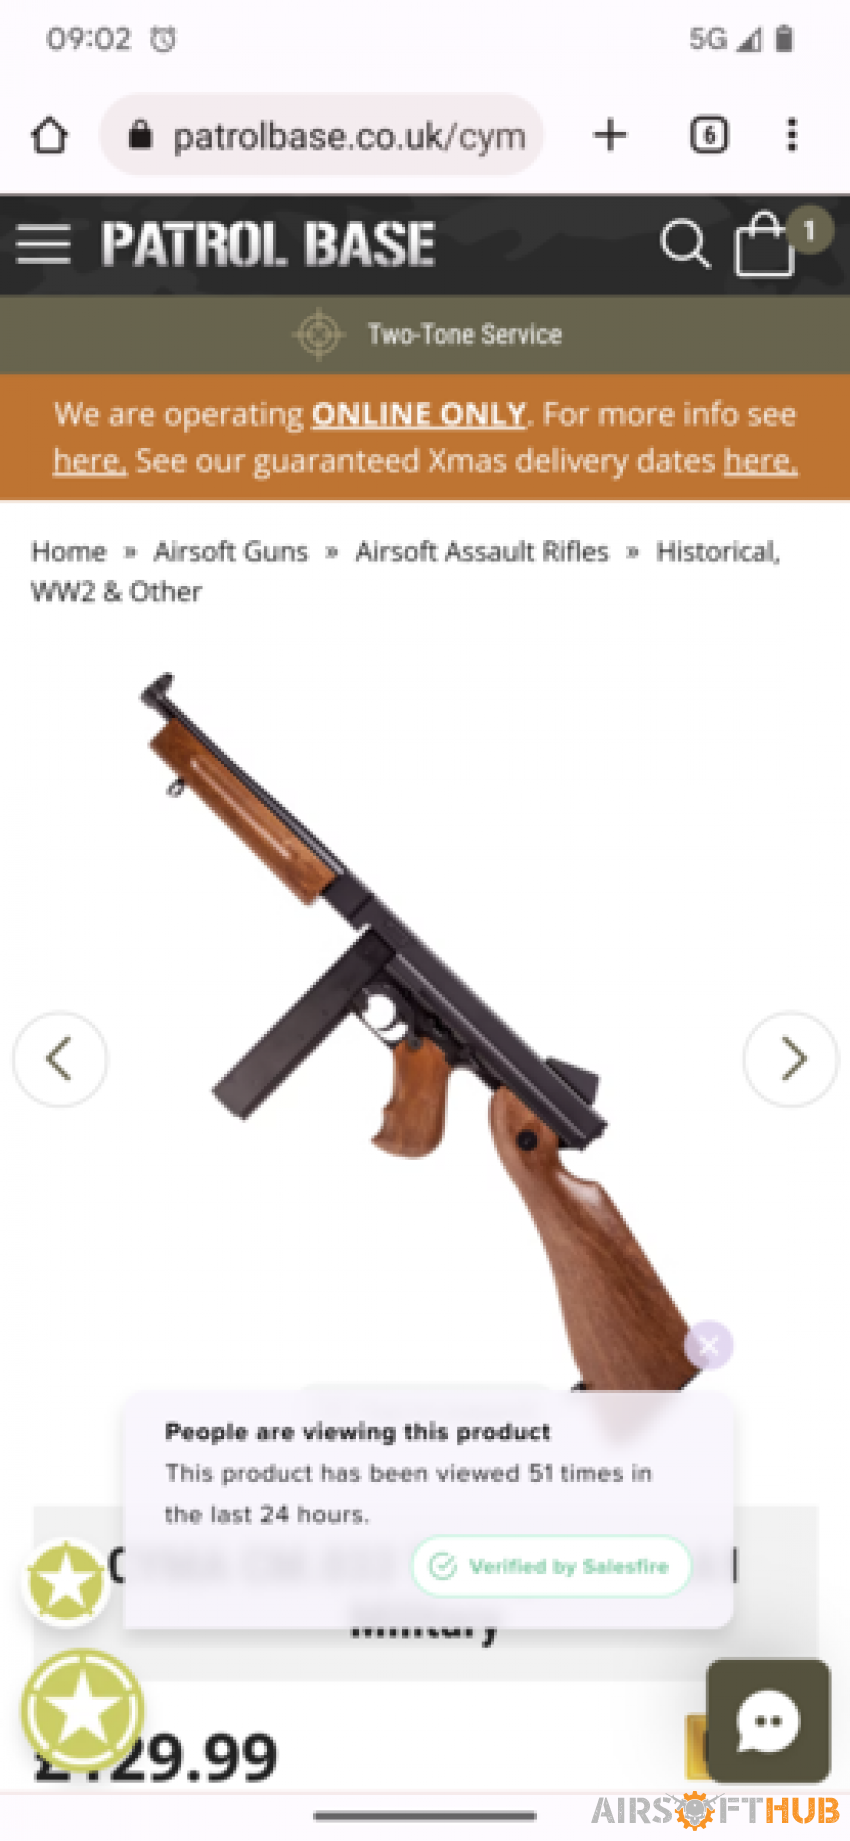 Wanted ww2 guns - Used airsoft equipment